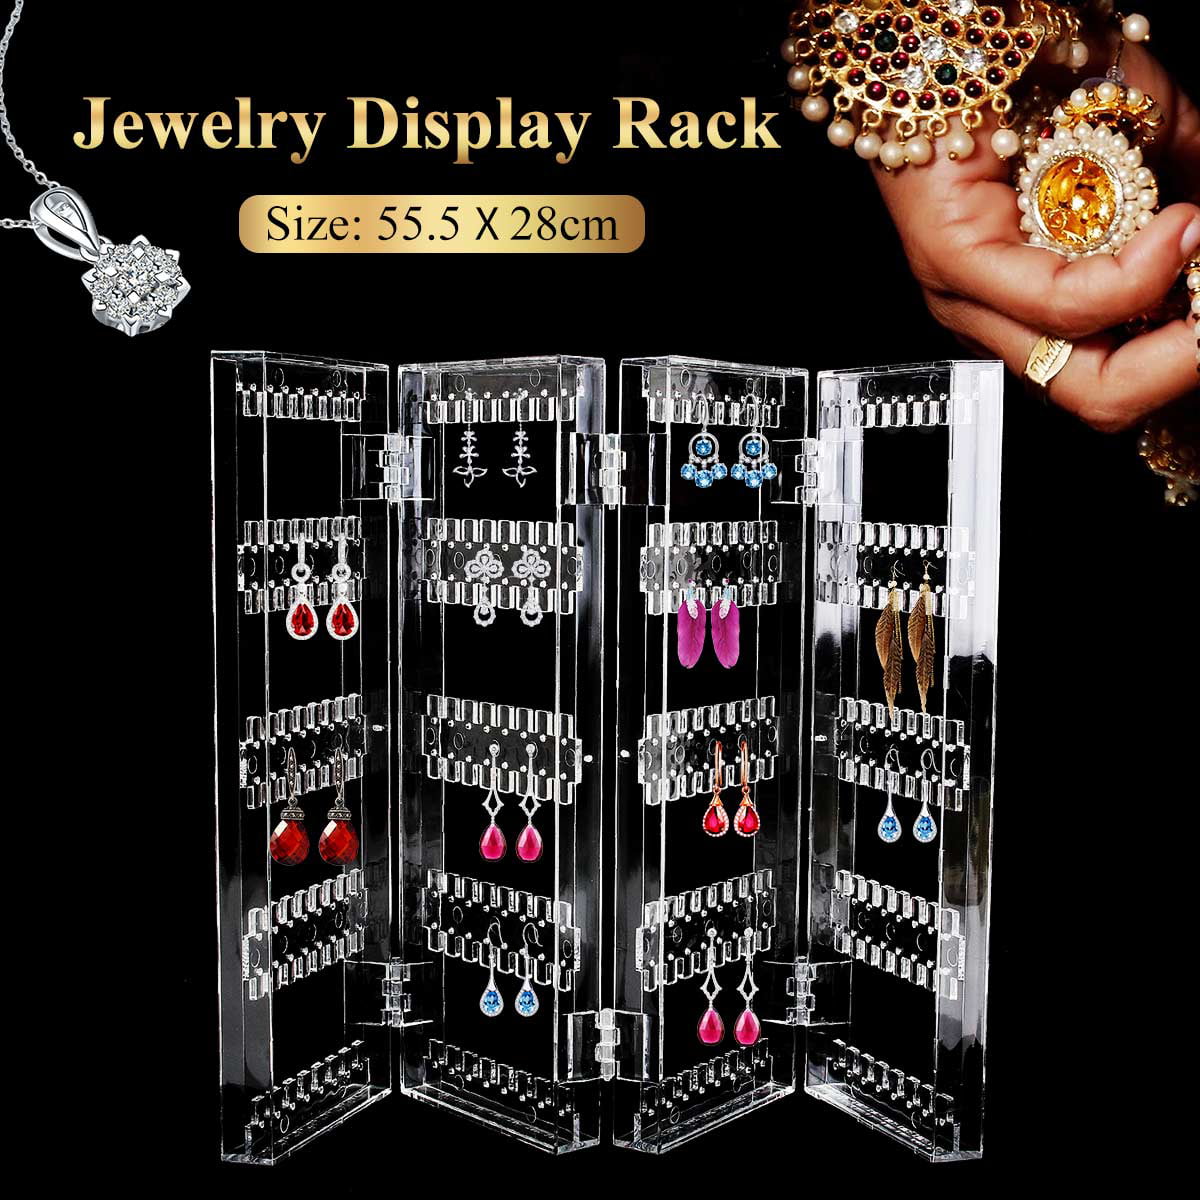 Earrings Ear Studs Necklace Jewelry Display Rack Stand Organizer Holder Box Case 